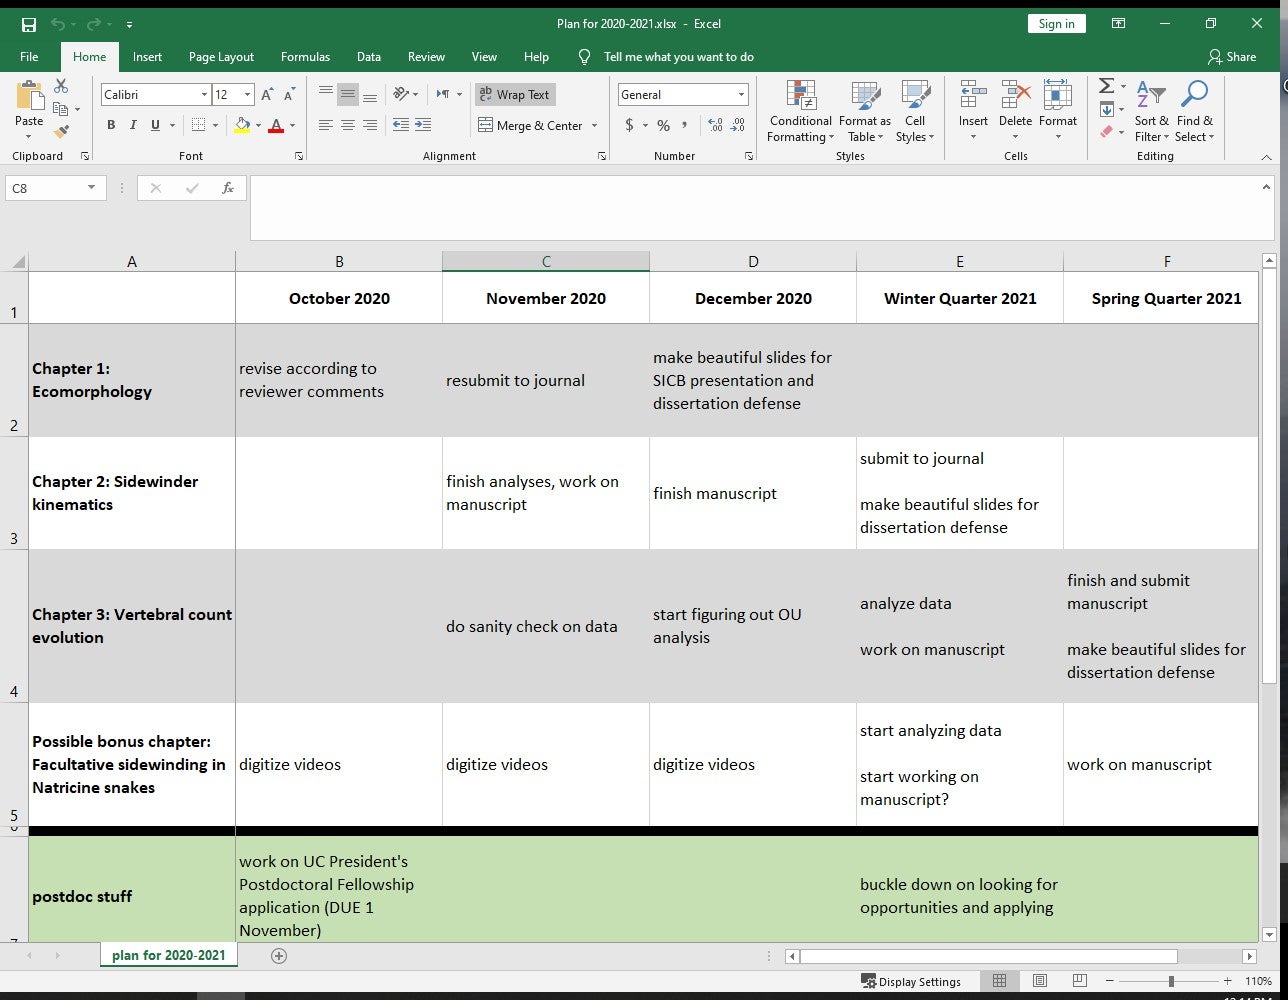 The example spreadsheet has goals laid out in columns for October 2020, November 2020, December 2020, Winter Quarter 2021, and Spring Quarter 2021. Four rows are labelled for four dissertation chapters, with an additional row for postdoc-related plans. The cells show major goals like “revise manuscript” and “finish analyses”. Some cells are blank; it wouldn’t make sense to work on every chapter every quarter.